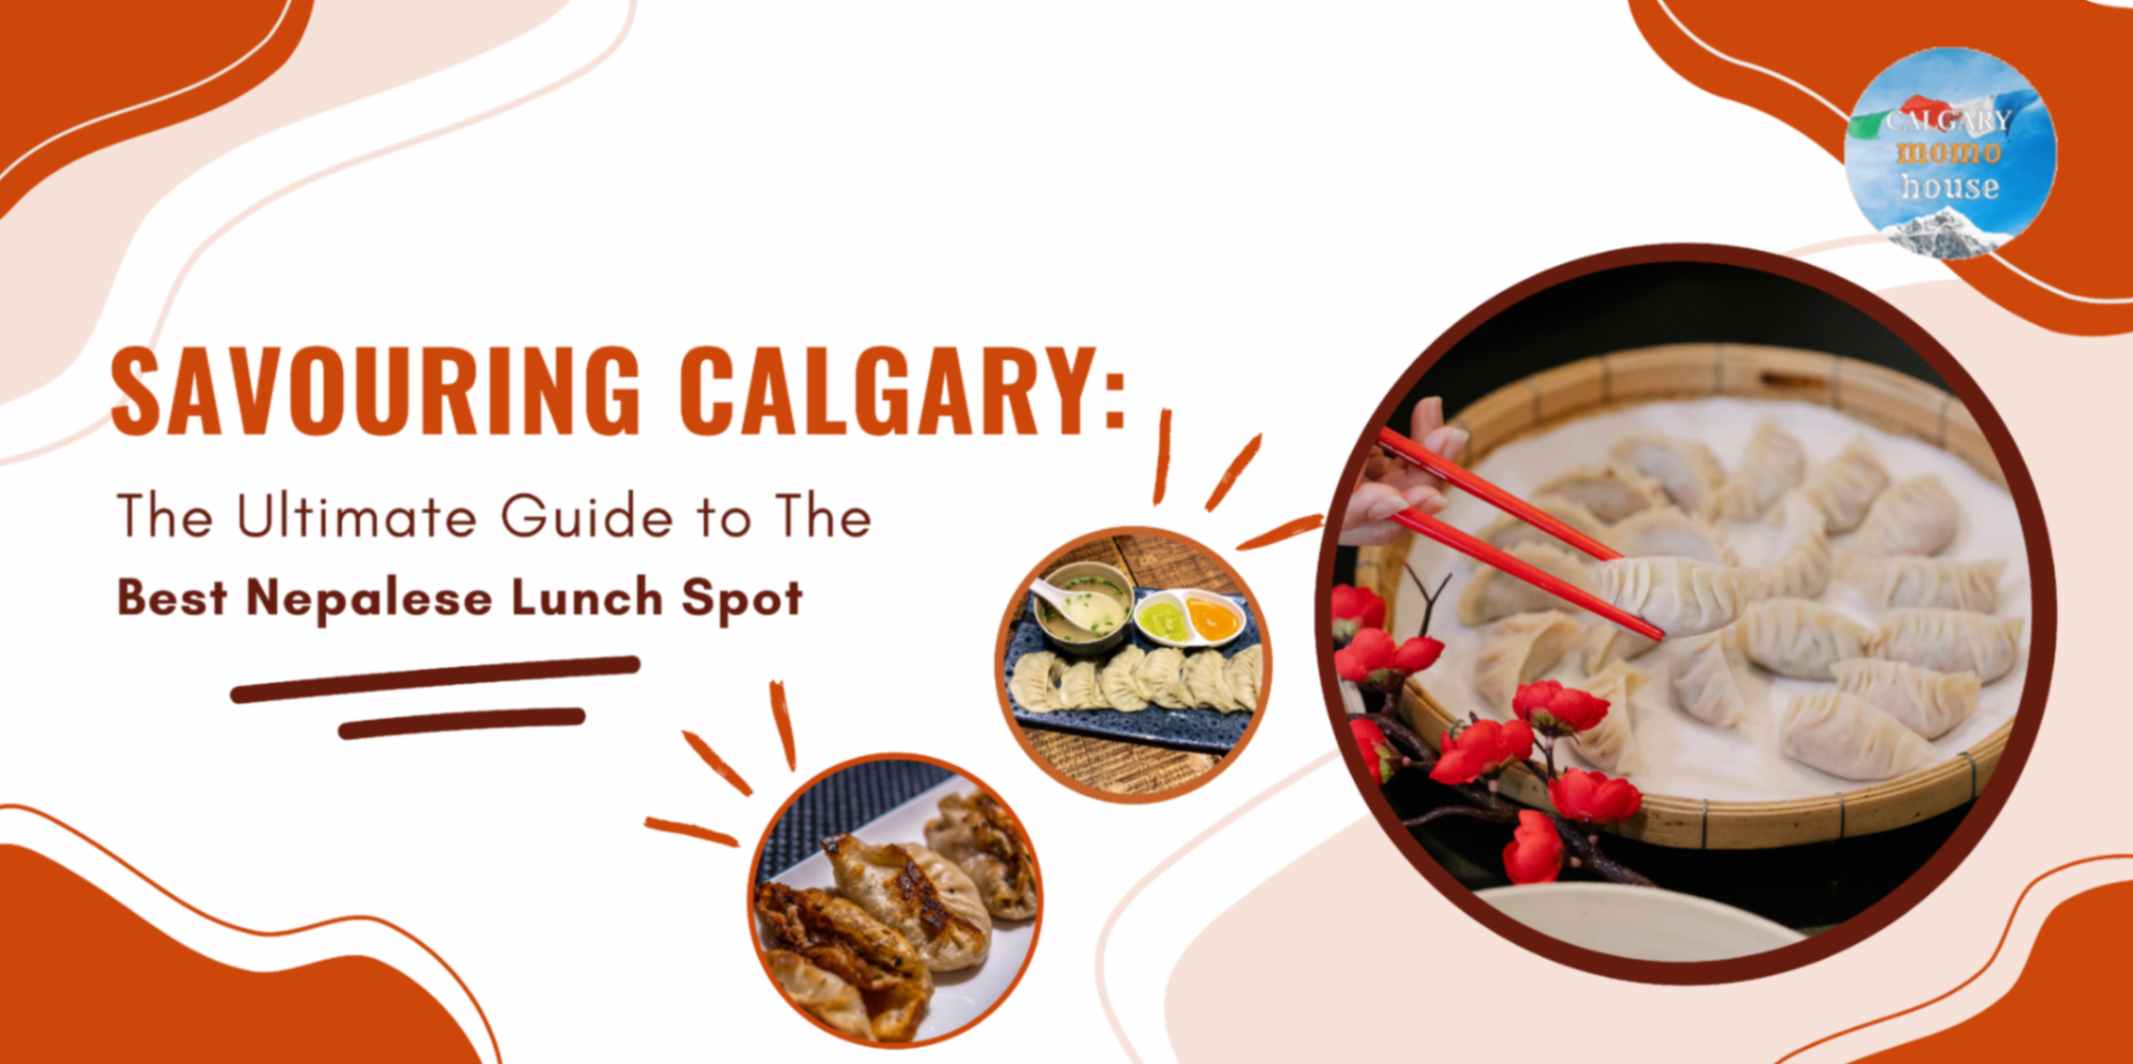 Savouring Calgary: The Ultimate Guide to The Best Nepalese Lunch Spot